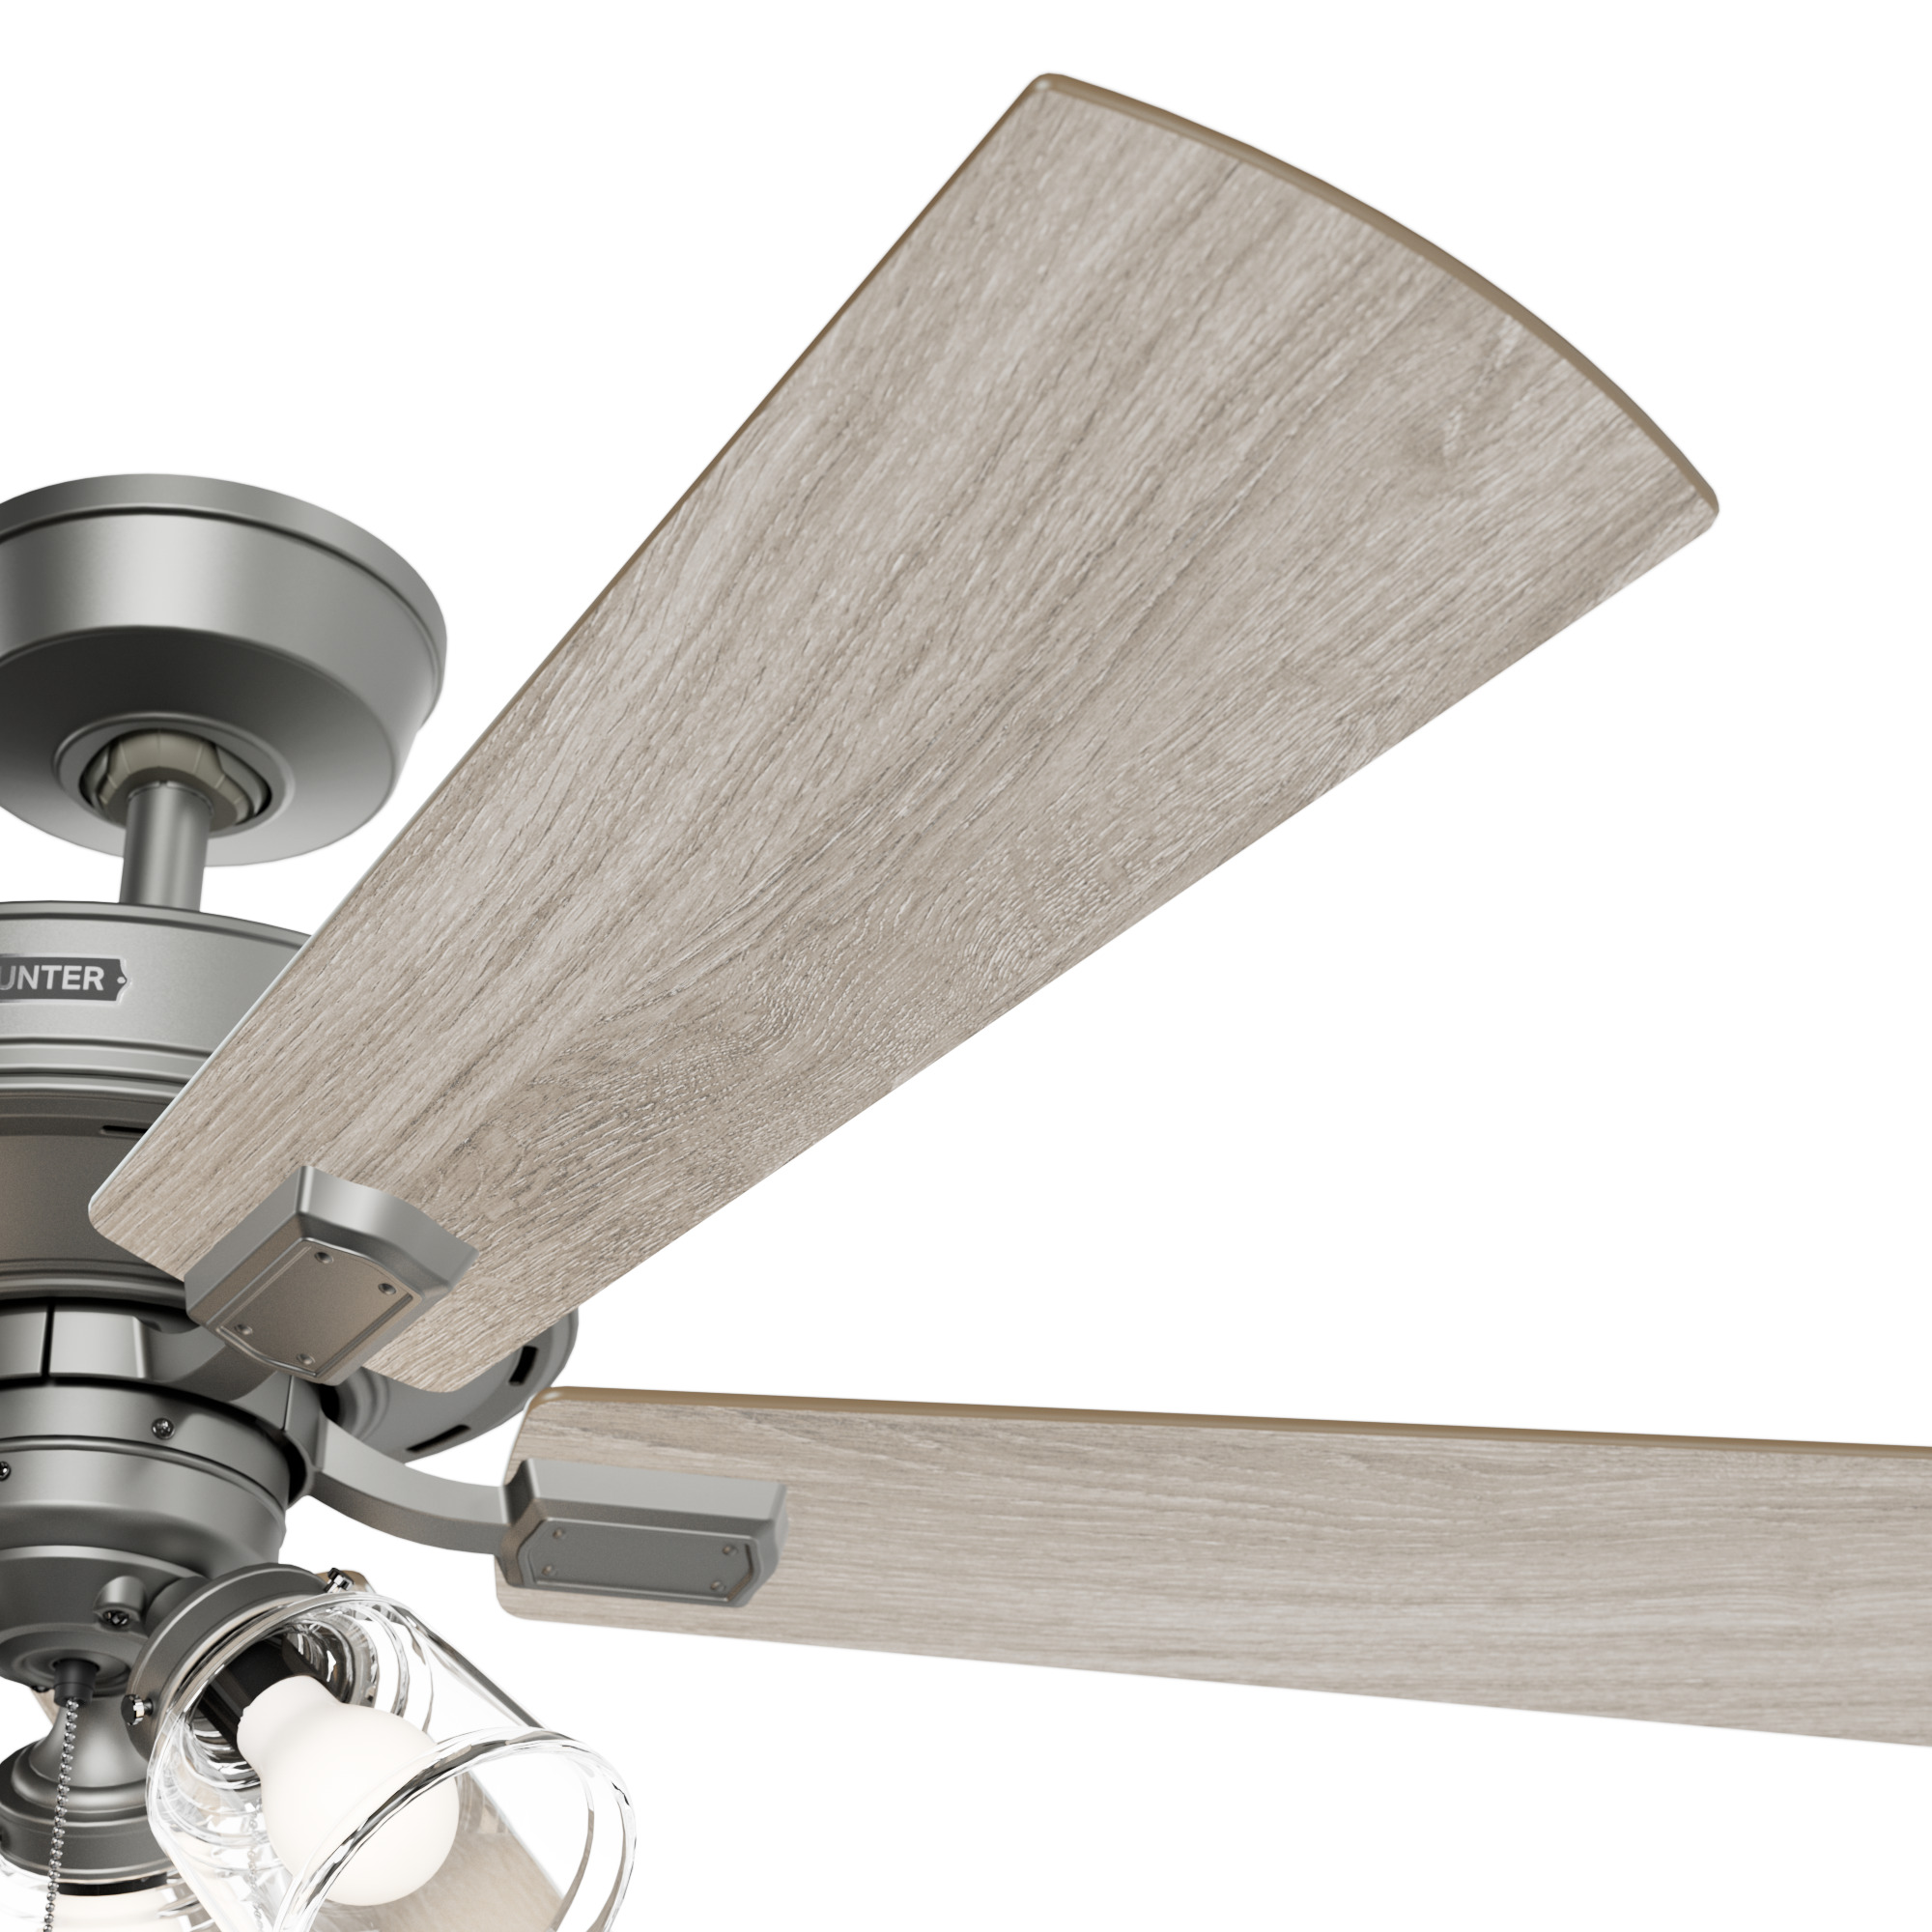 3D renders of ceiling fans and light fixtures